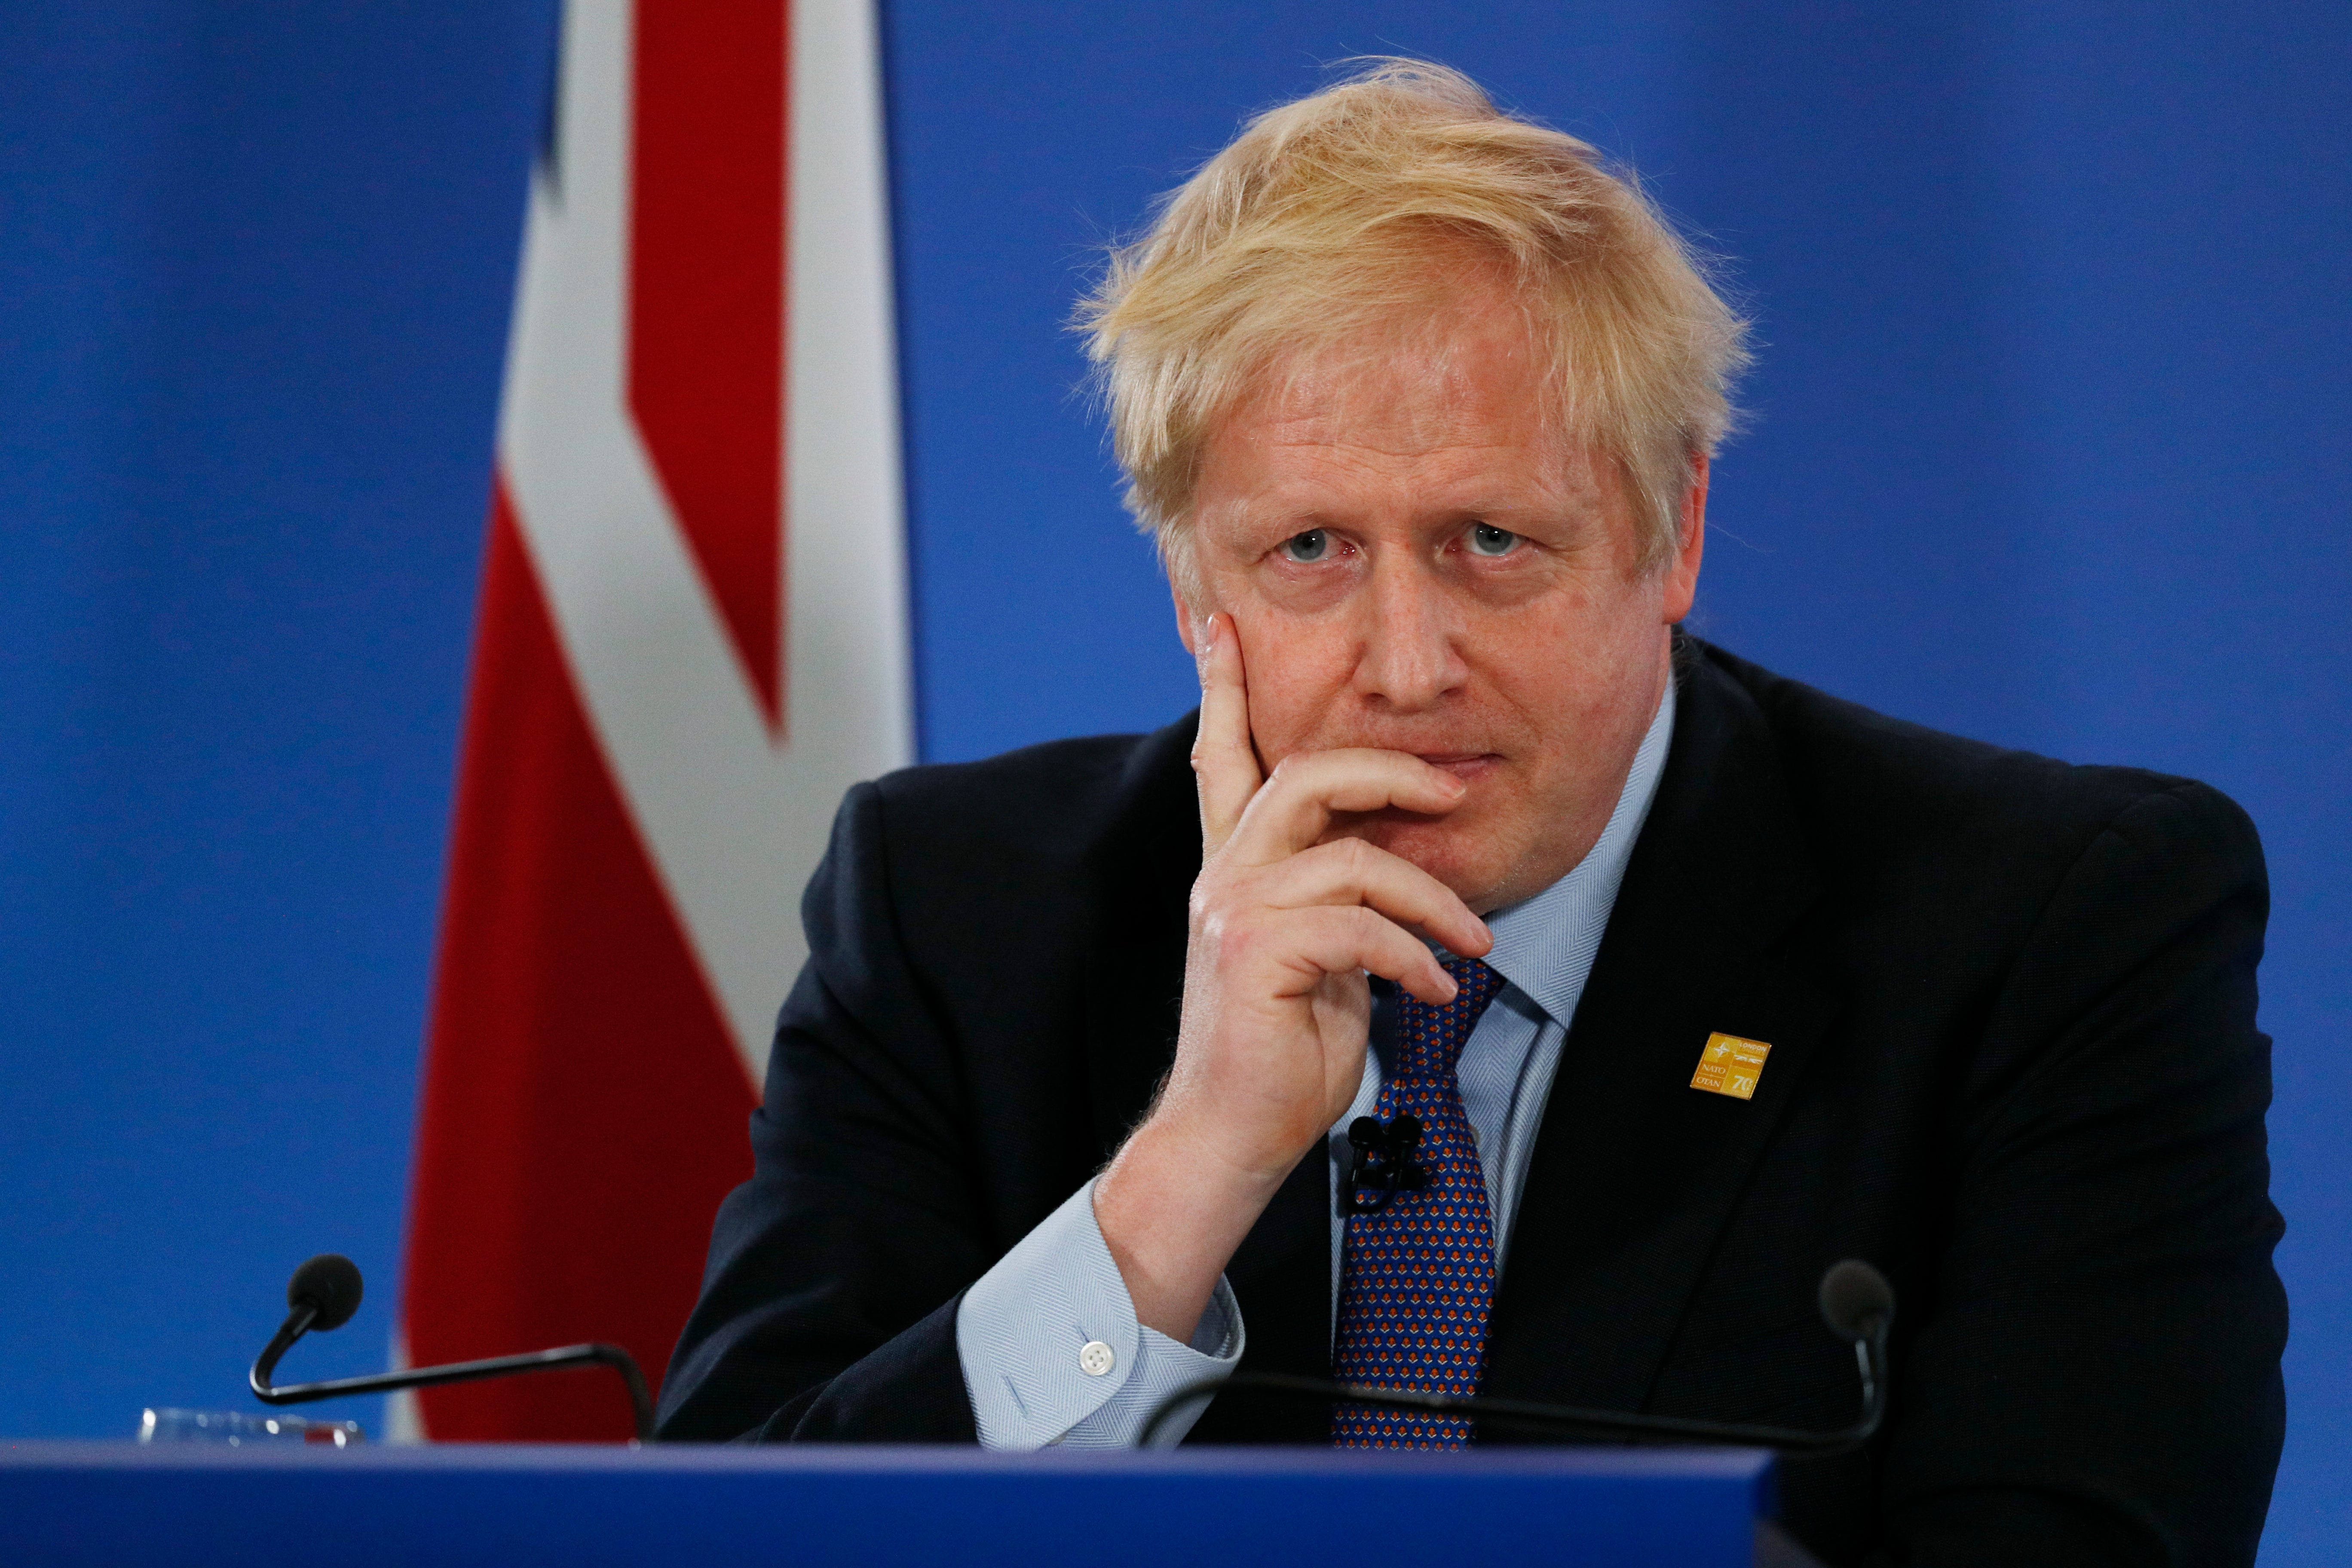 Campaigners have written an open letter to Boris Johnson explaining their concerns about any move to implement an amnesty